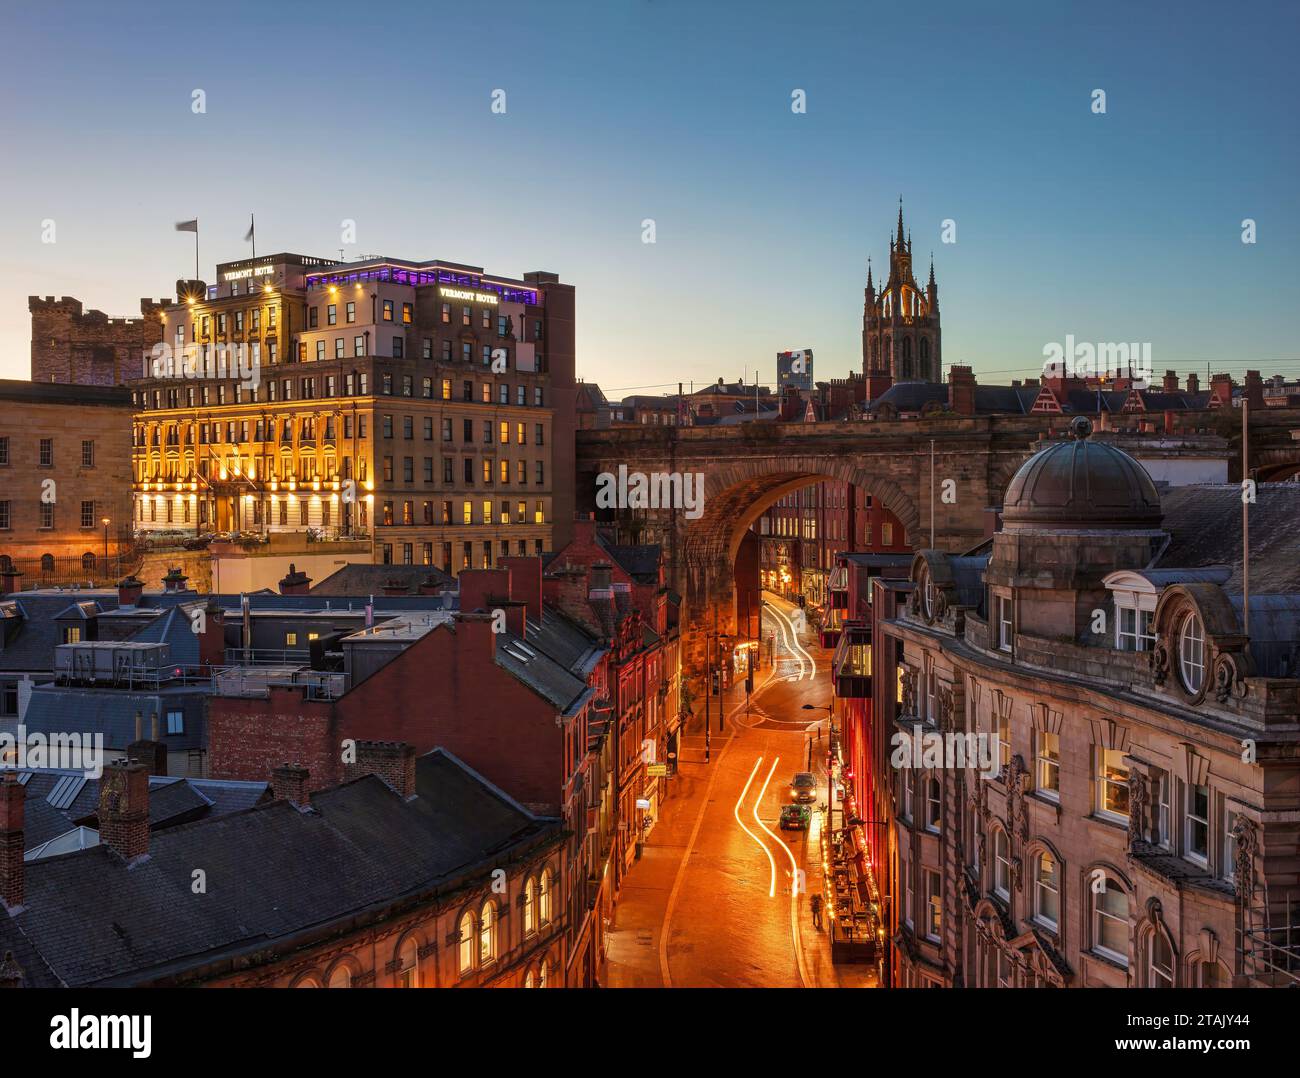 View of Newcastle upon Tyne at dusk seen from the Tyne Bridge looking along The Side towards St Nicholas Cathedral with a clear night sky above Stock Photo